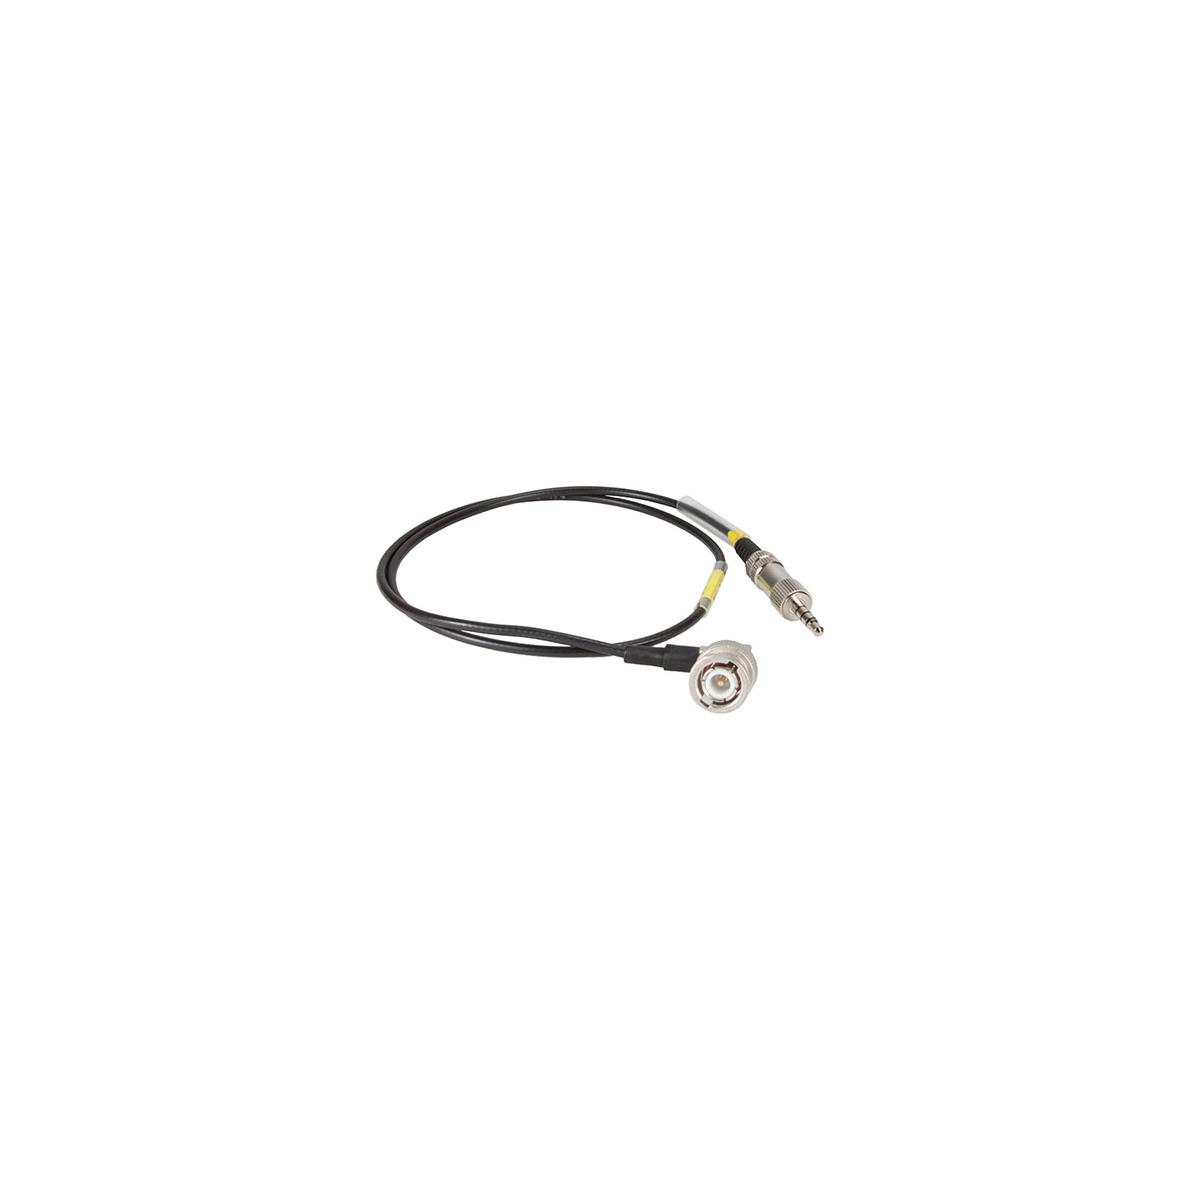 Image of Ambient Recording Timecode Input Cable with BNC/M Connector to 3.5mm TRRS Jack